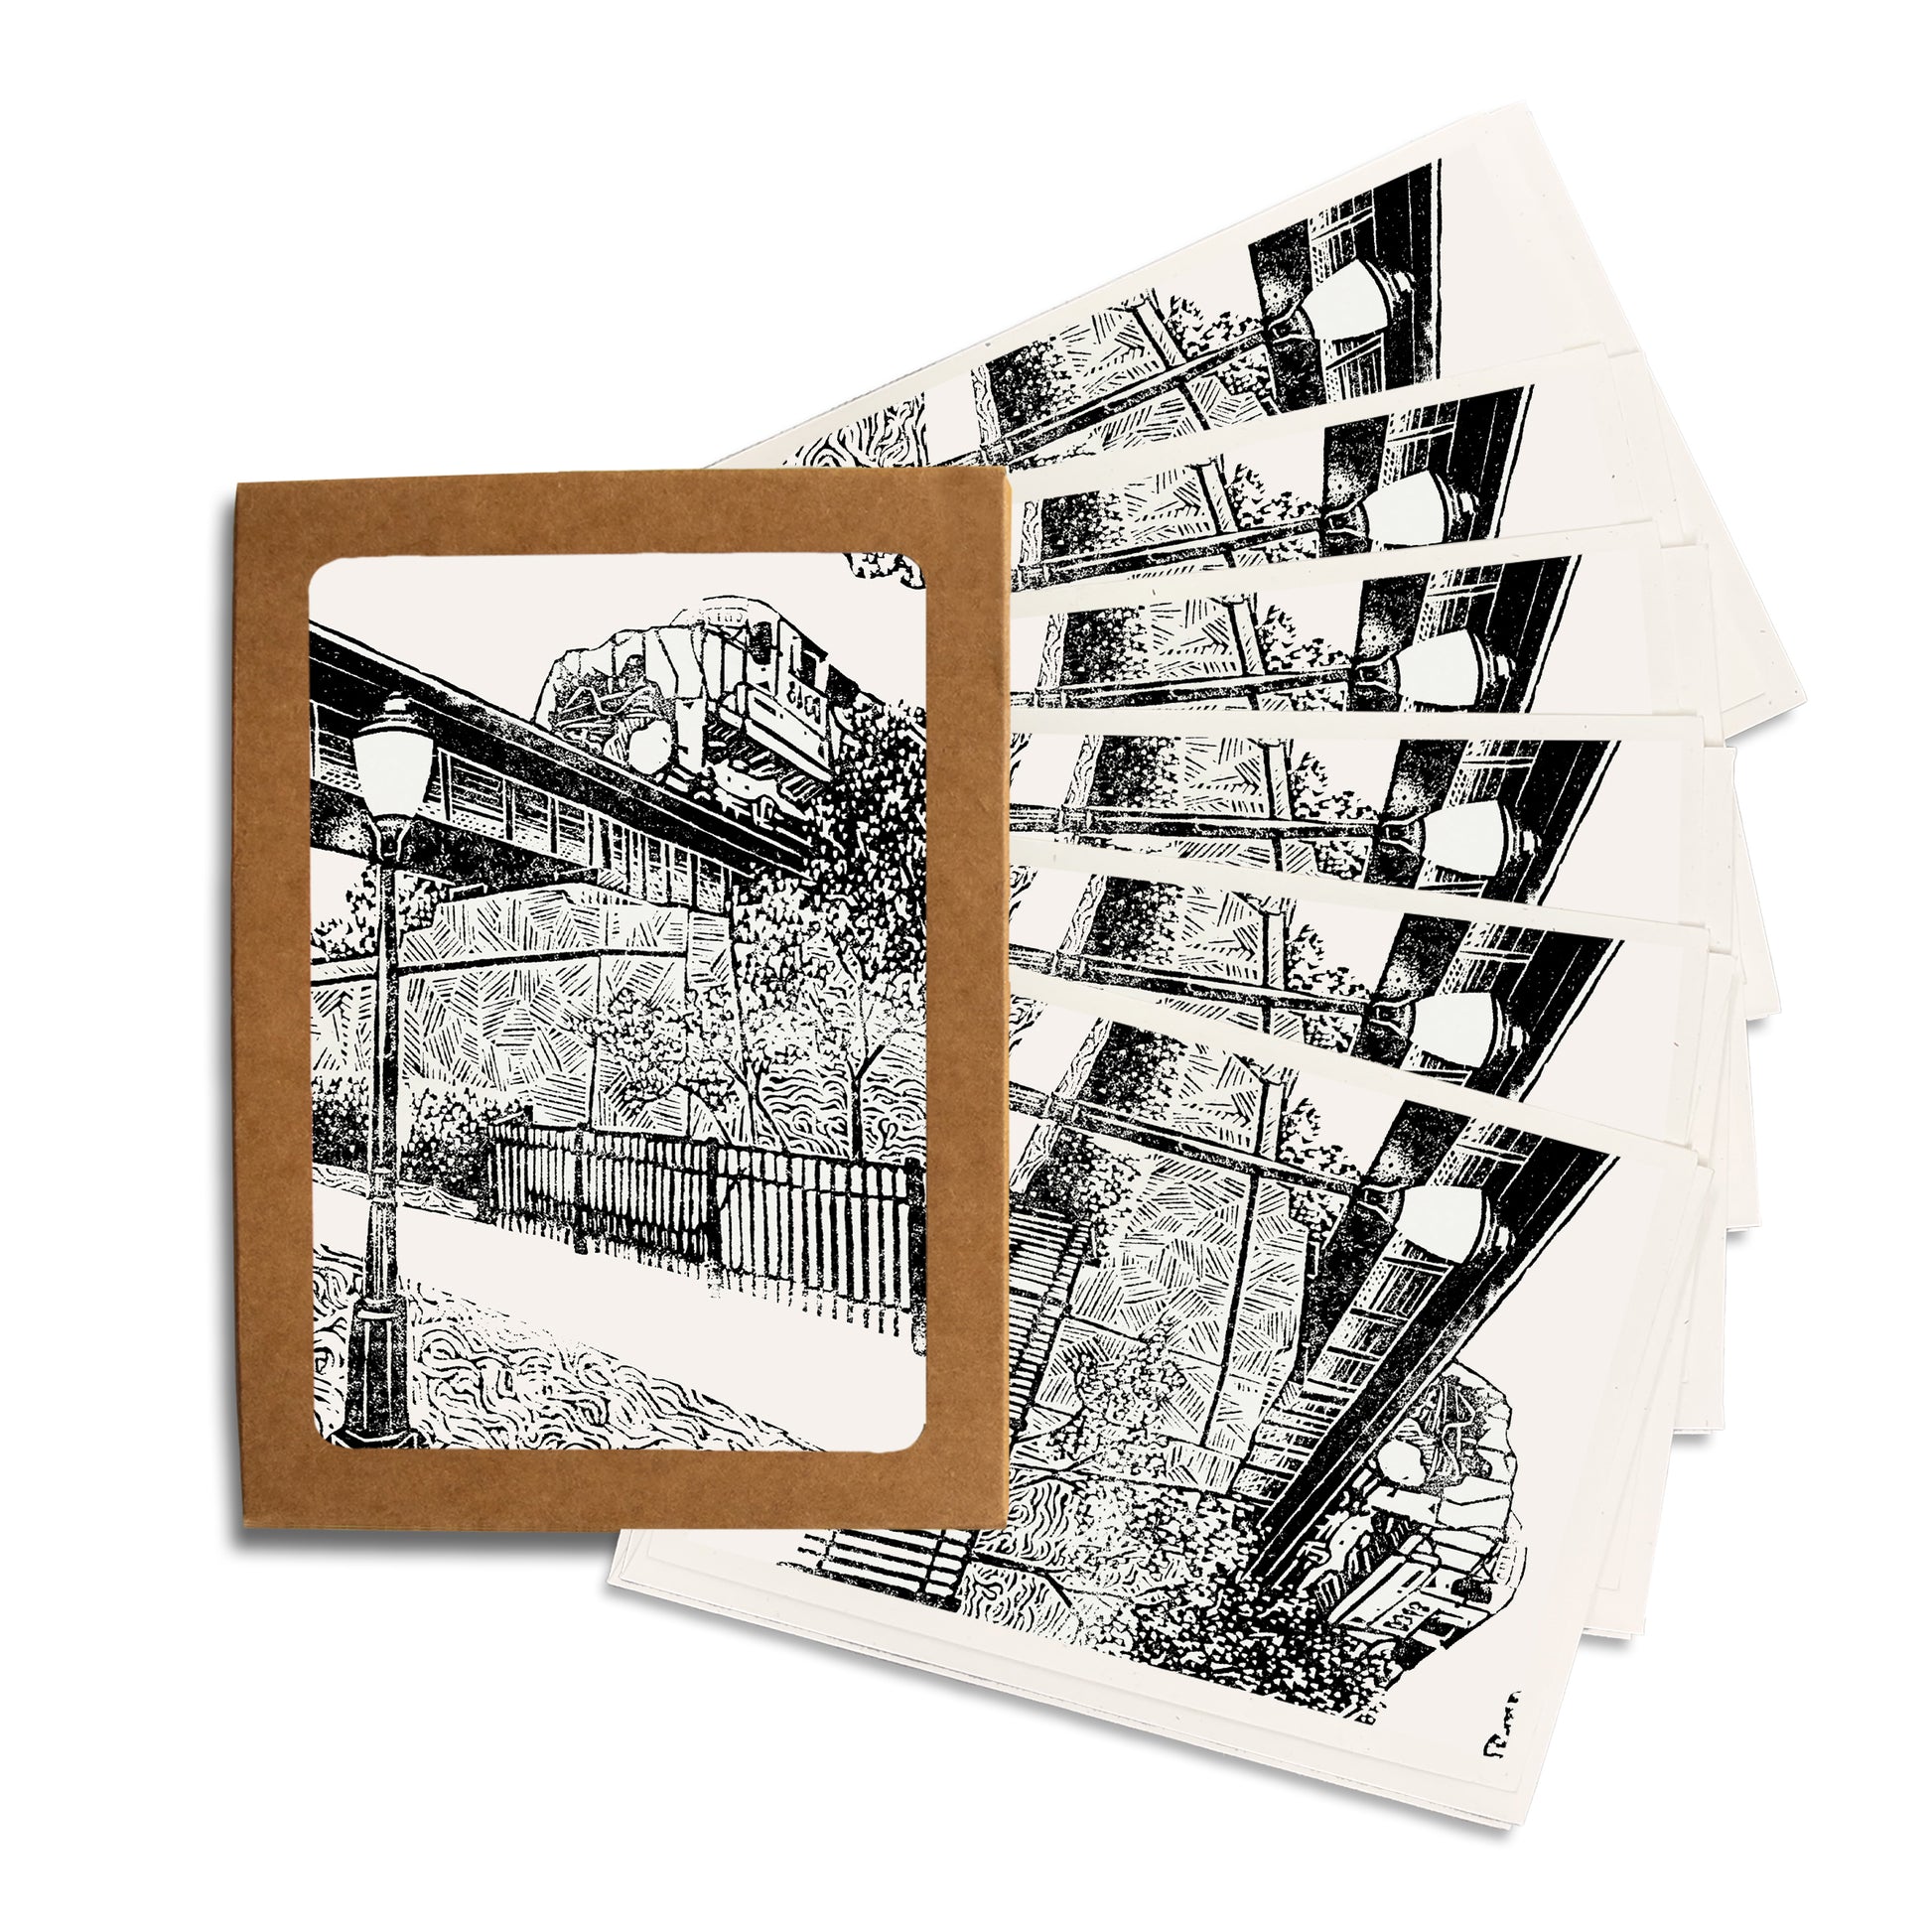 Milford Train. A casually elegant set of cards featuring a digital reproduction of a block print design with the same title by Natalia Wohletz of Peninsula Prints, Milford and Mackinac Island, Michigan.